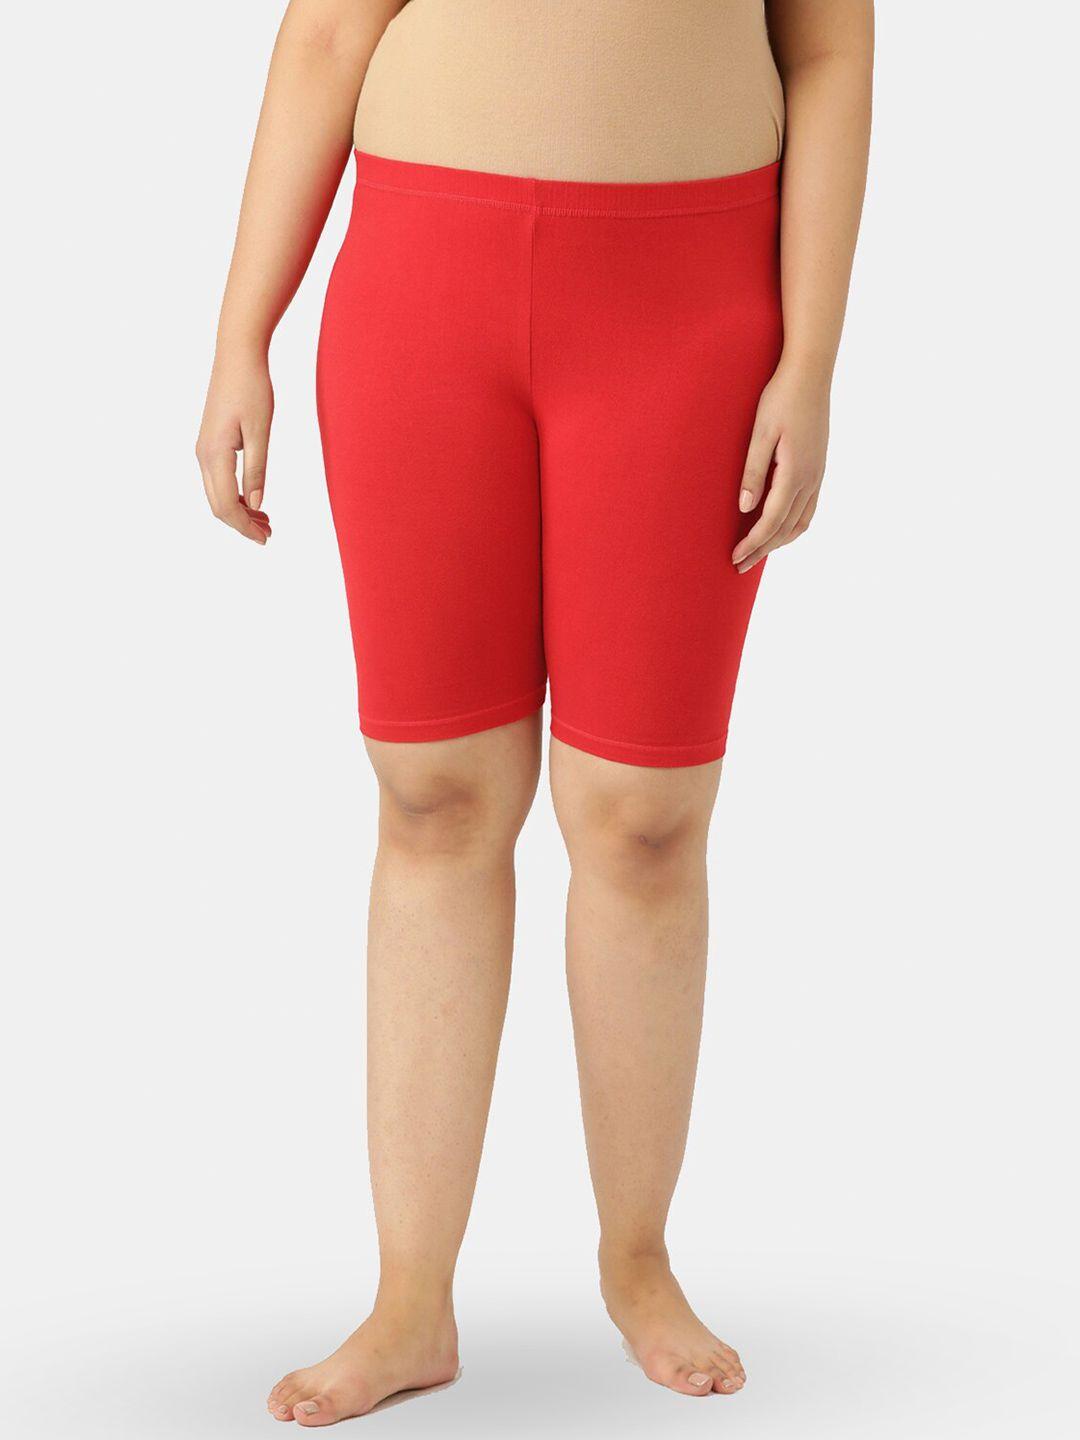 leading-lady-plus-size-women-red-high-rise-pure-cotton-lounge-shorts